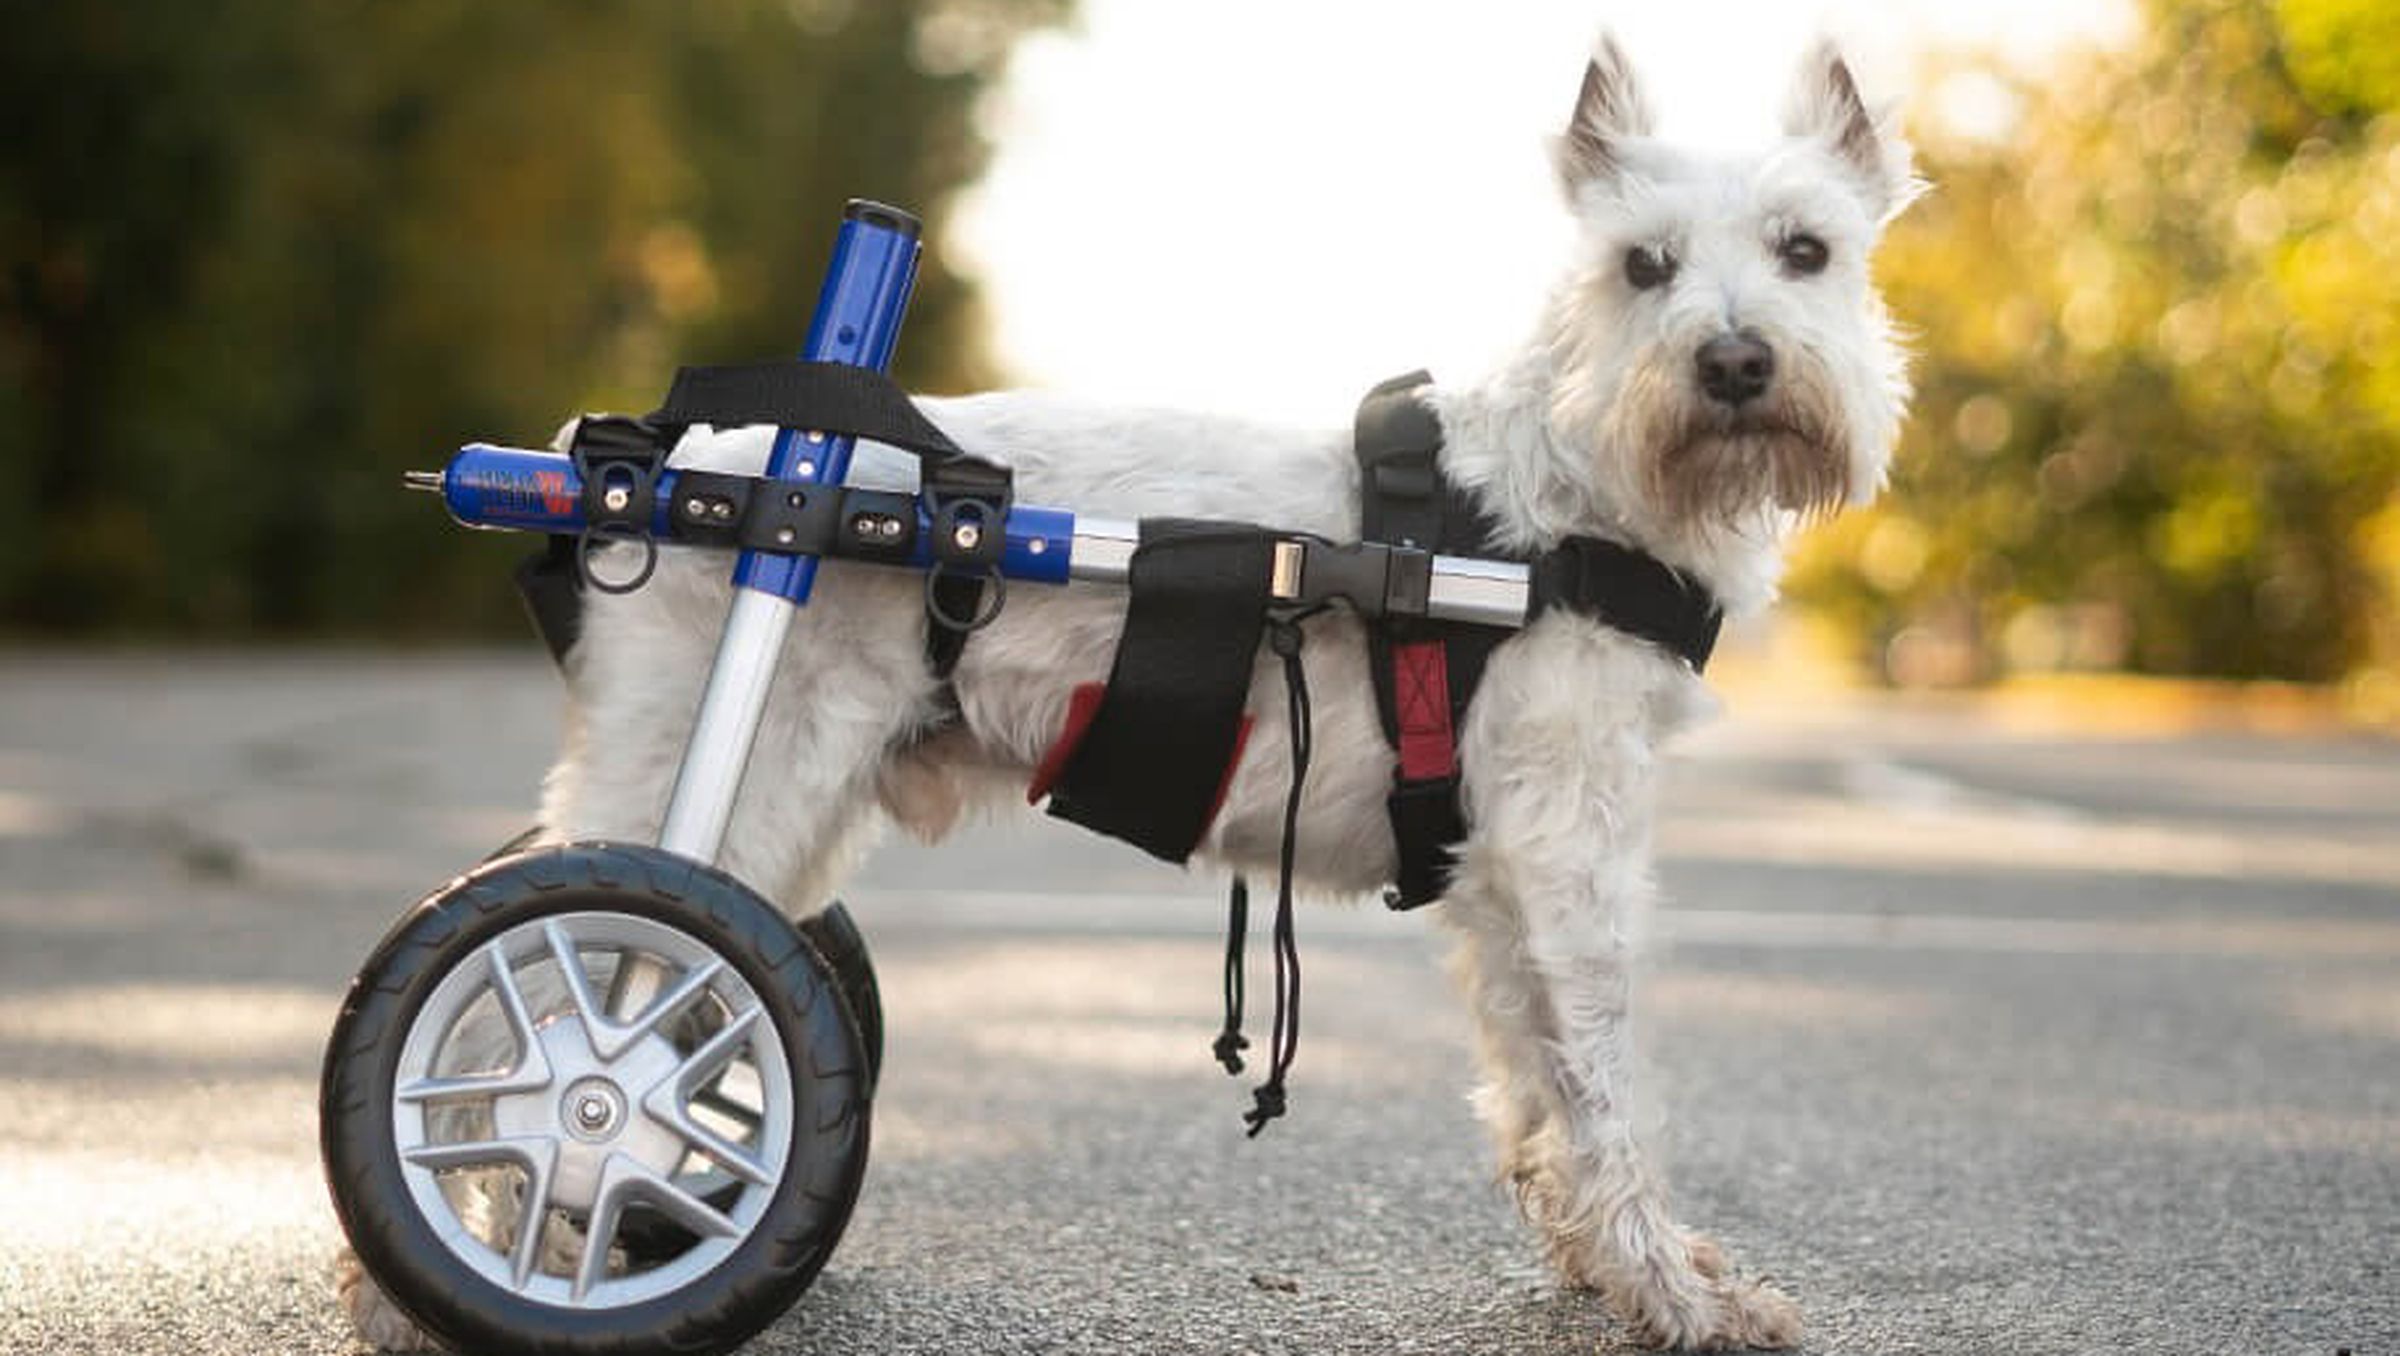 Small dog on street with hind legs being supported by wheels and hind quarters strapped in.